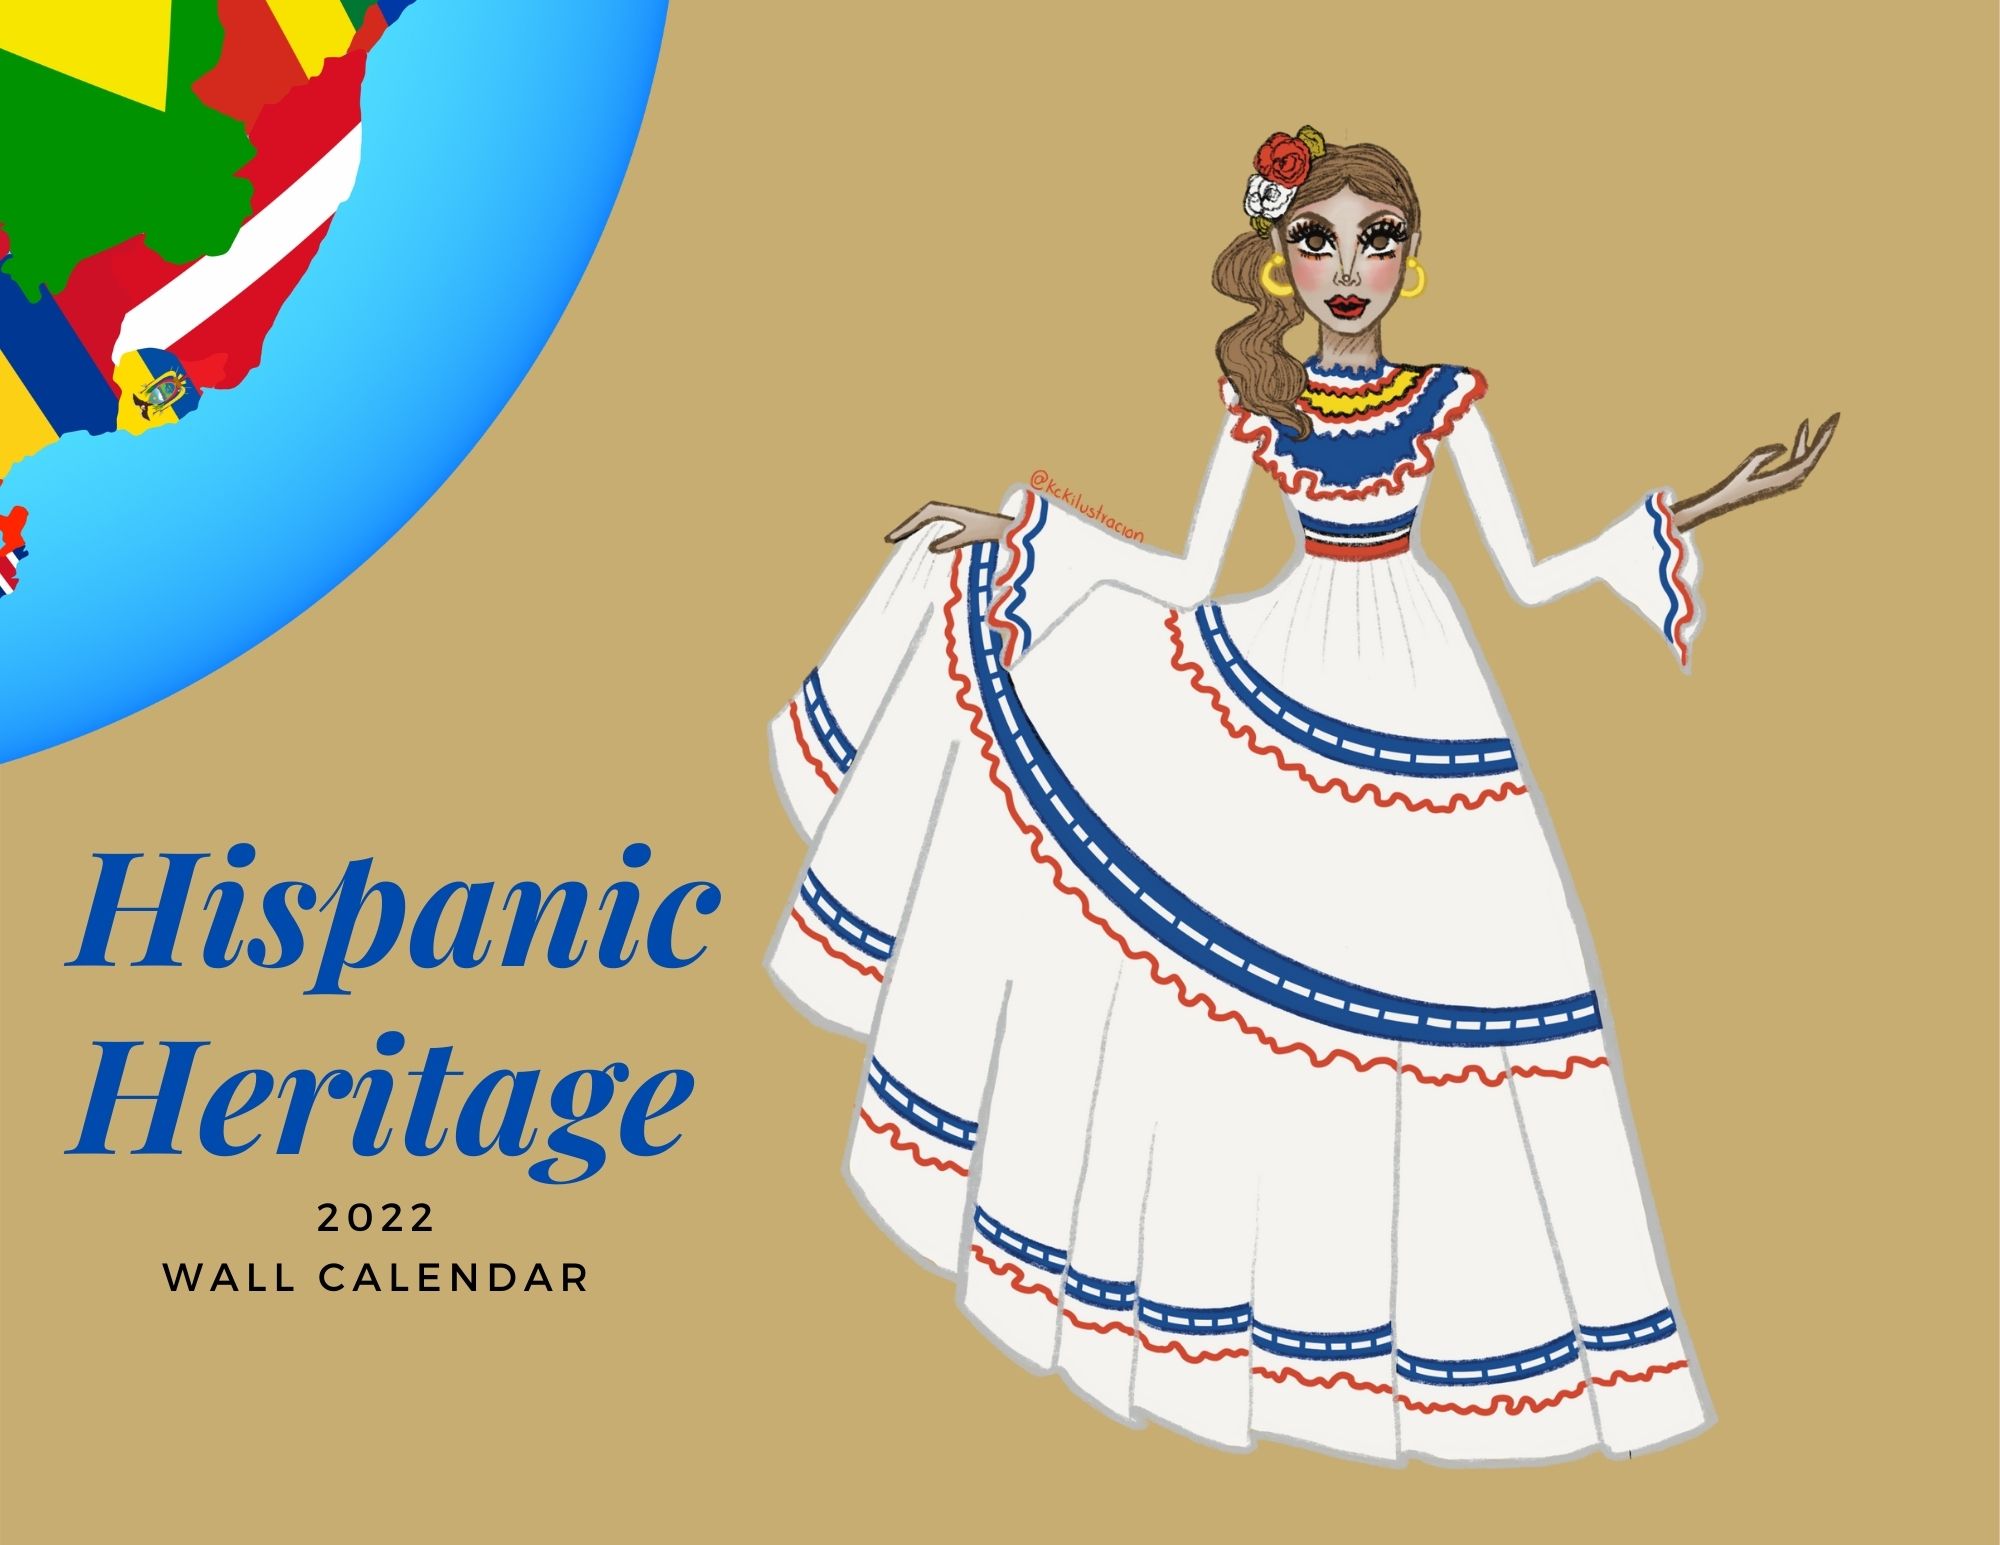 First Hispanic Heritage Wall Calendar to Celebrate Historical Moments